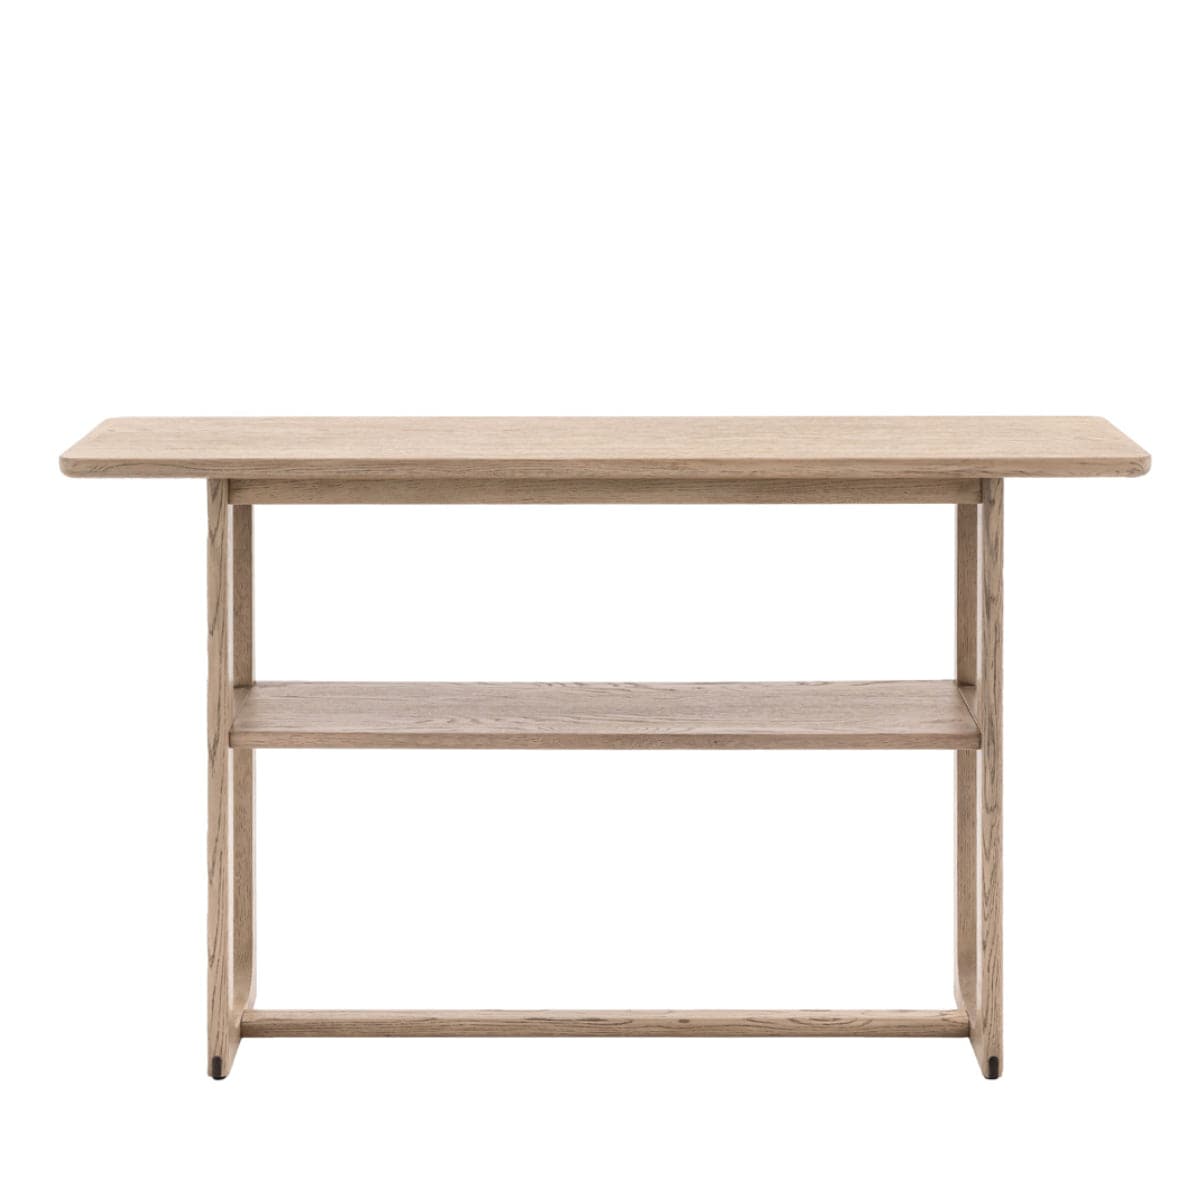 Nordic Styled Smoked Oak Console Table - The Farthing